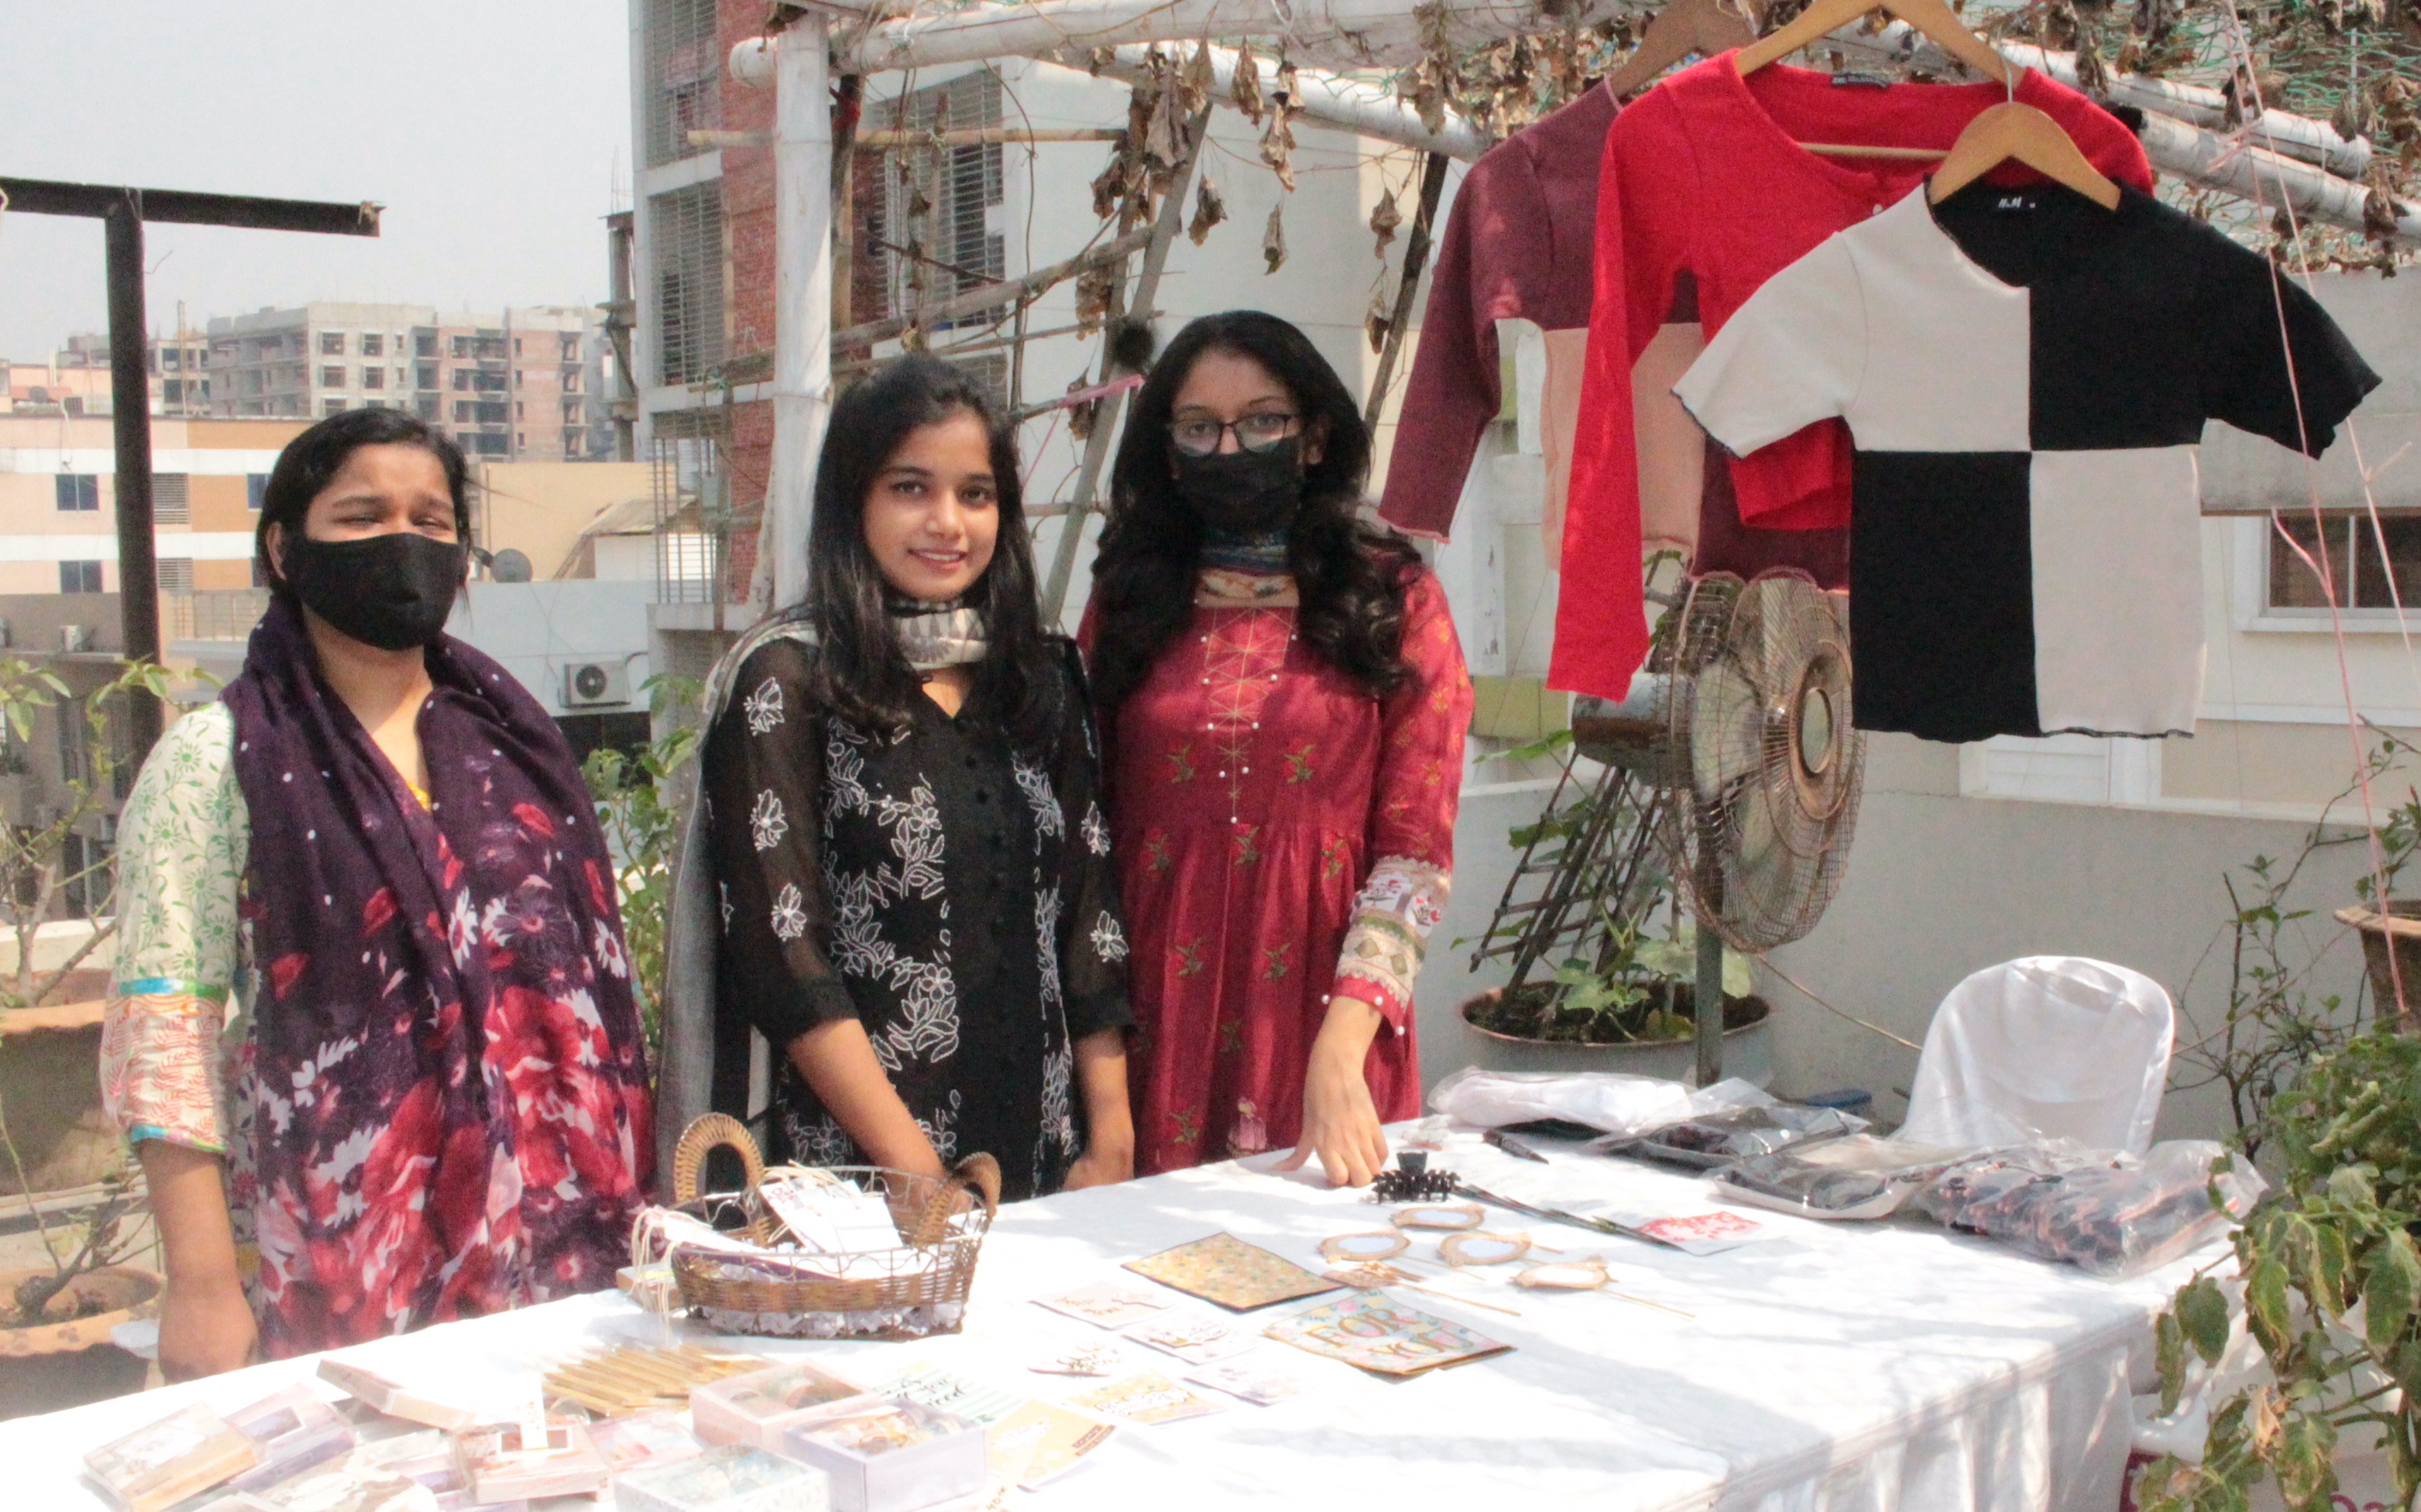 Several of the stall owners showcasing their products on tables